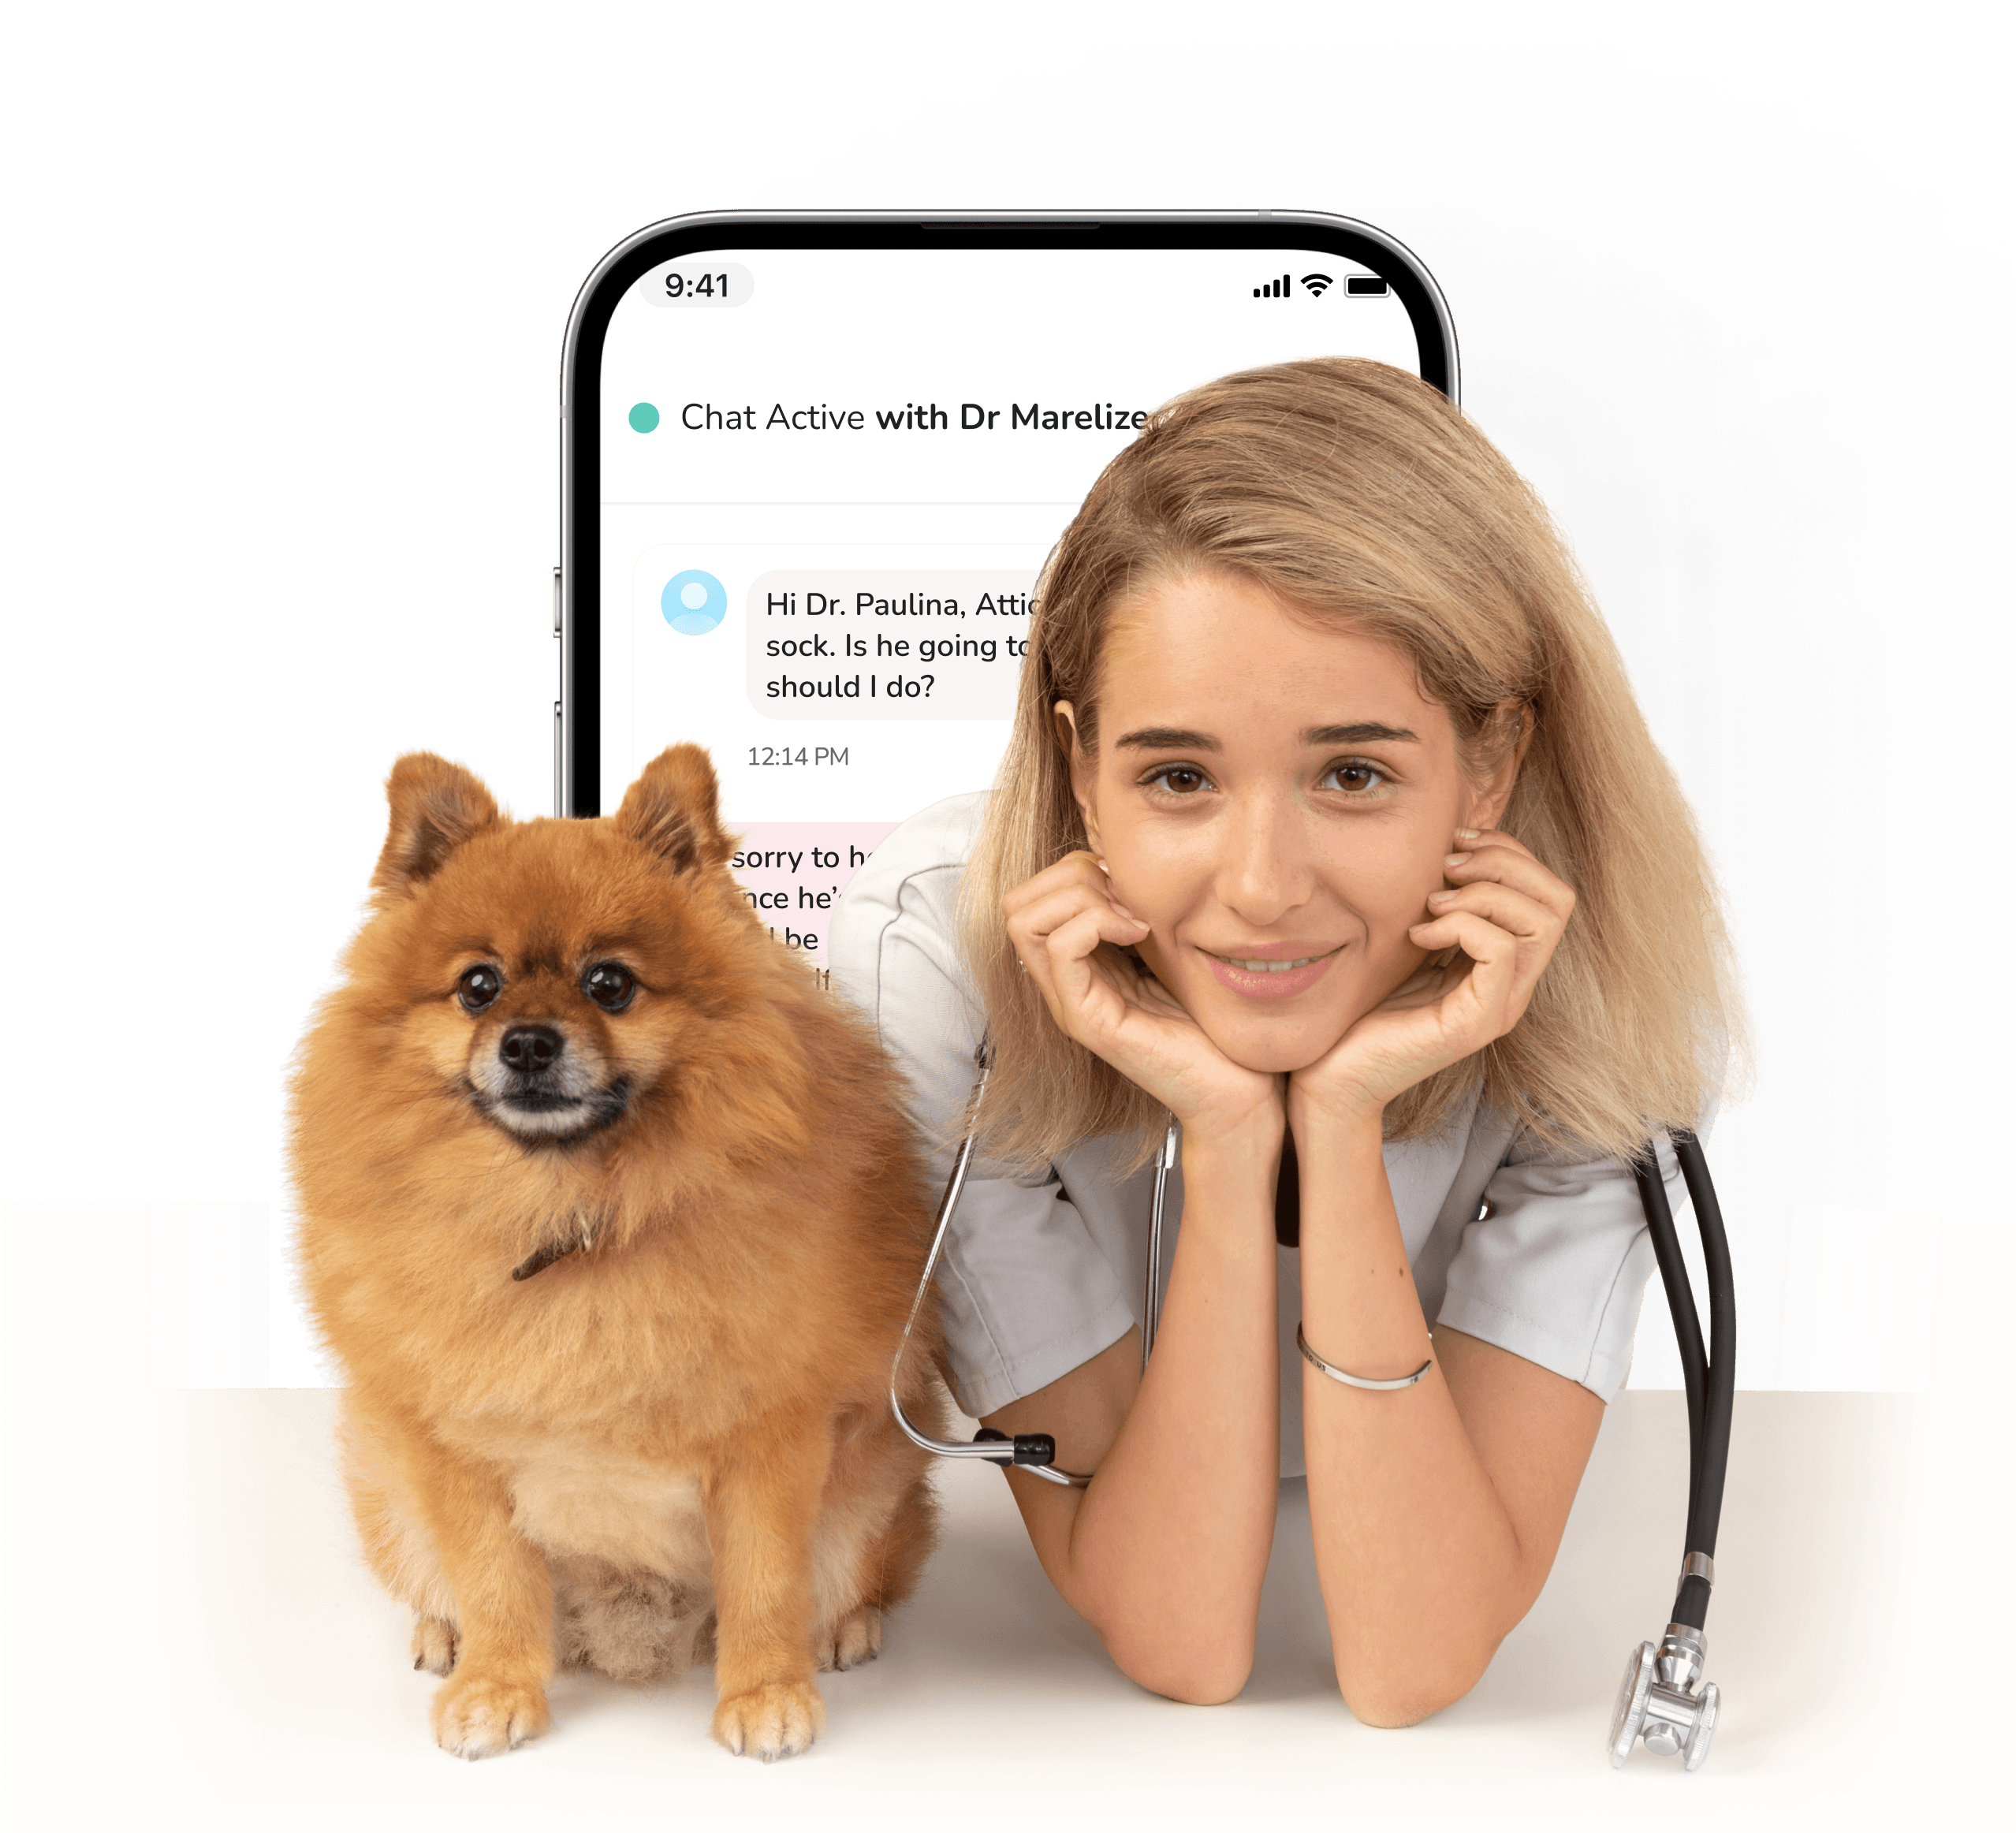 A vet doctor has both hands on her chin and resting her arms on a surface. There is a dog beside her and a chat screen from a mobile app behind them.